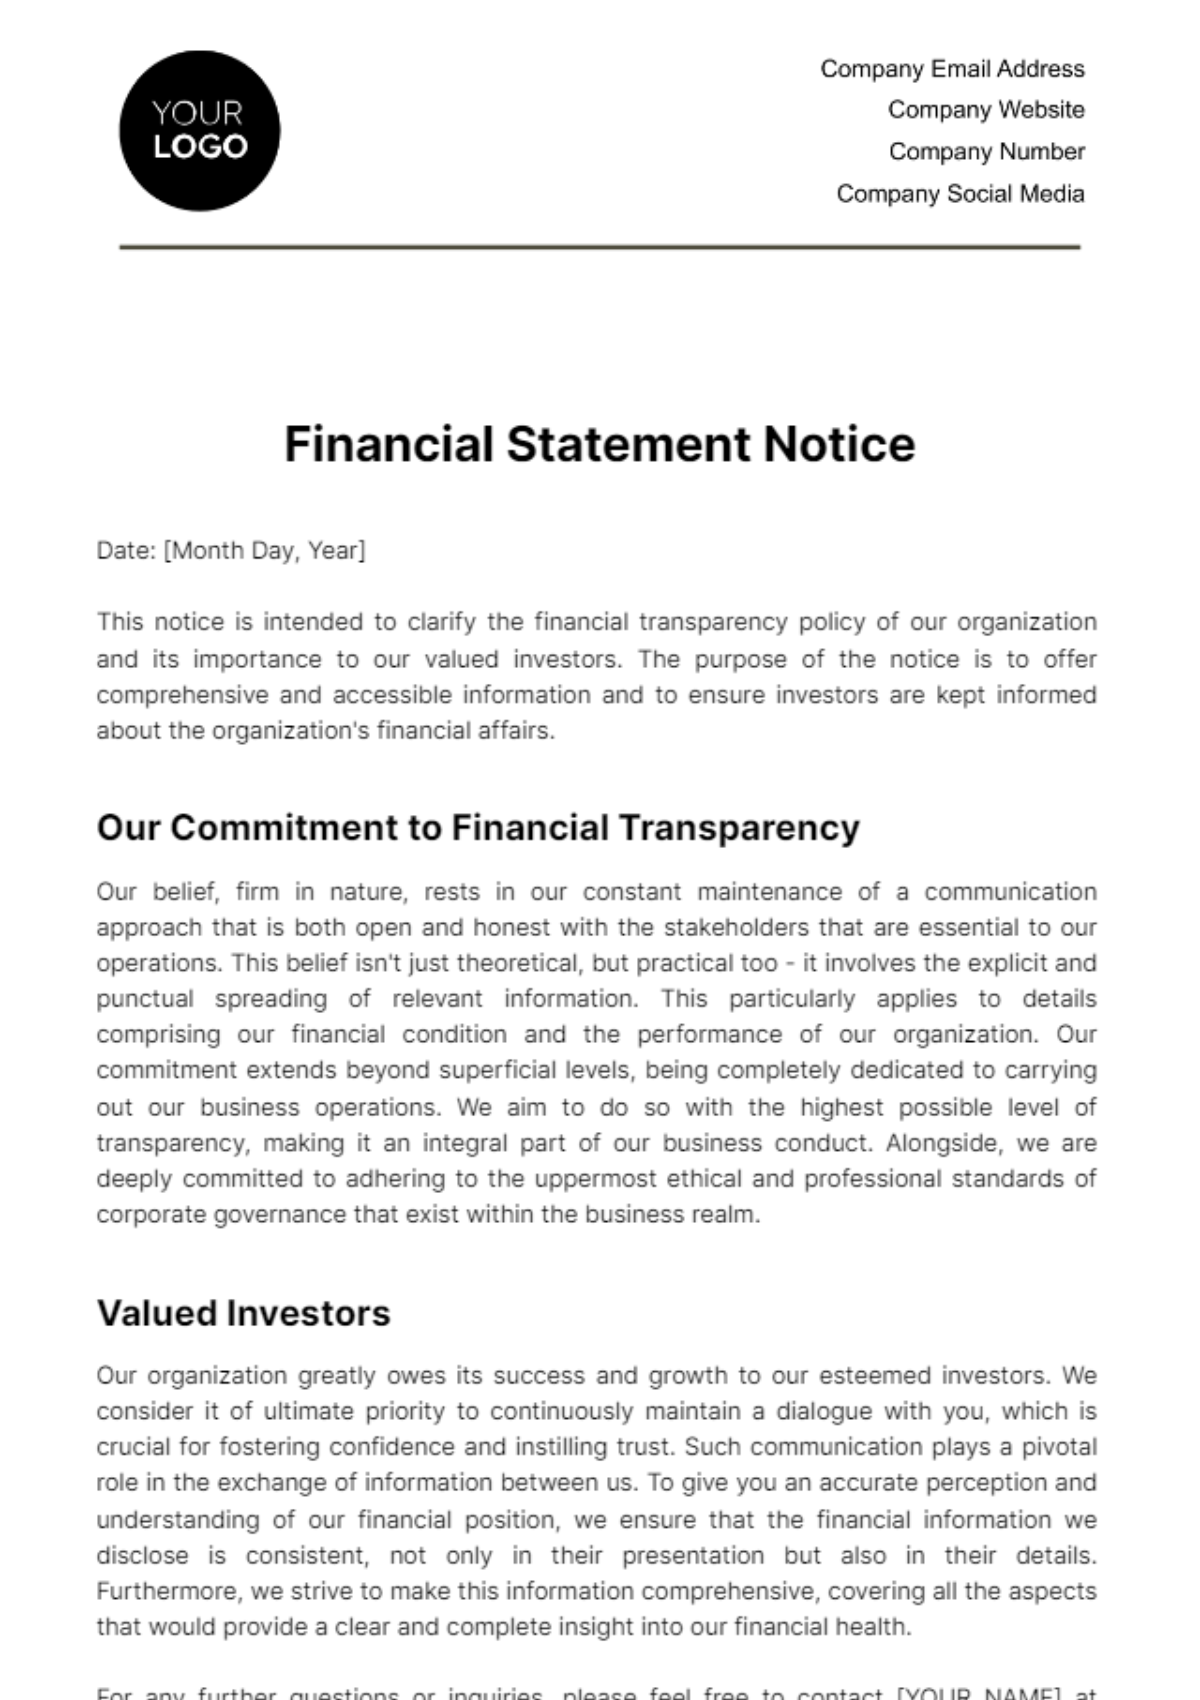 Financial Statement Notice Template